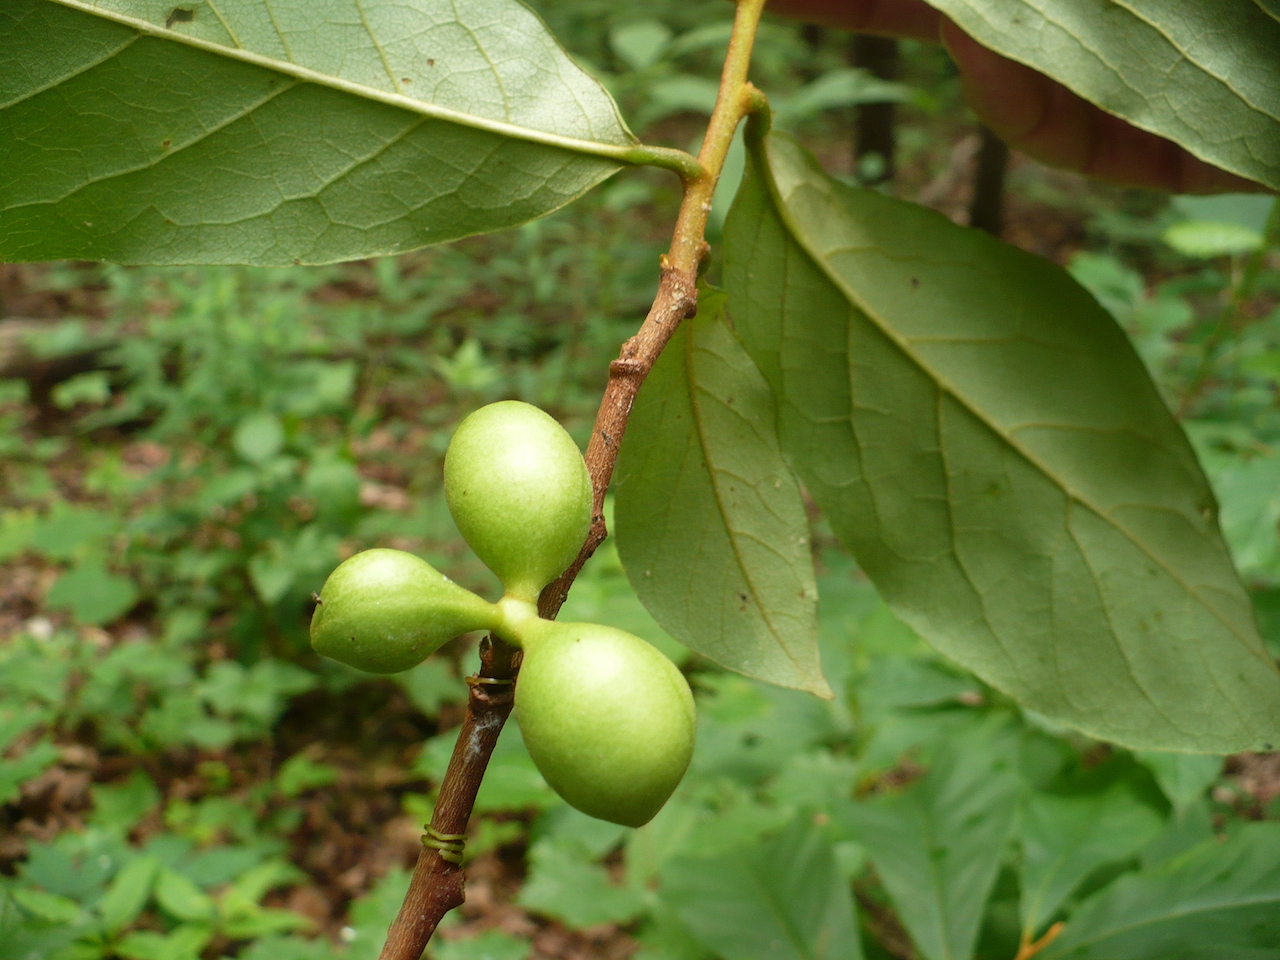 The Scientific Name is Asimina parviflora. You will likely hear them called dwarf pawpaw. This picture shows the Developing fruit. of Asimina parviflora